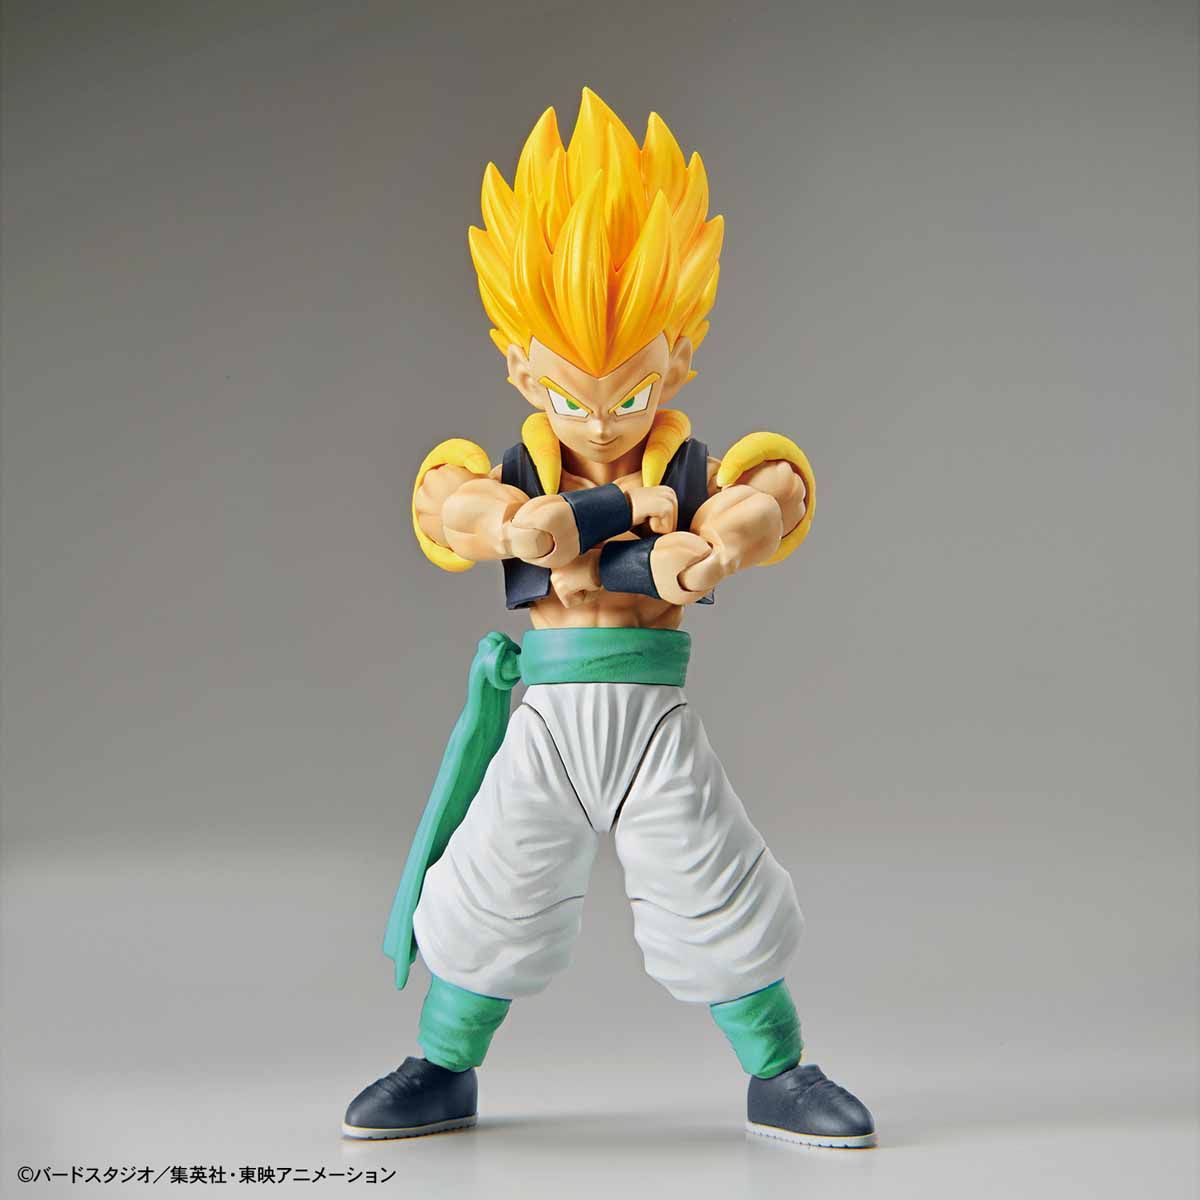 Dragon Ball - Super Saiyan Gotenks - Figure-rise Standard Model Kit (Bandai), Includes Super Ghost and Galactic Donut effect parts, various hand parts for posing, and two facial expression options. Released on 2019-05-31. Available at Nippon Figures.